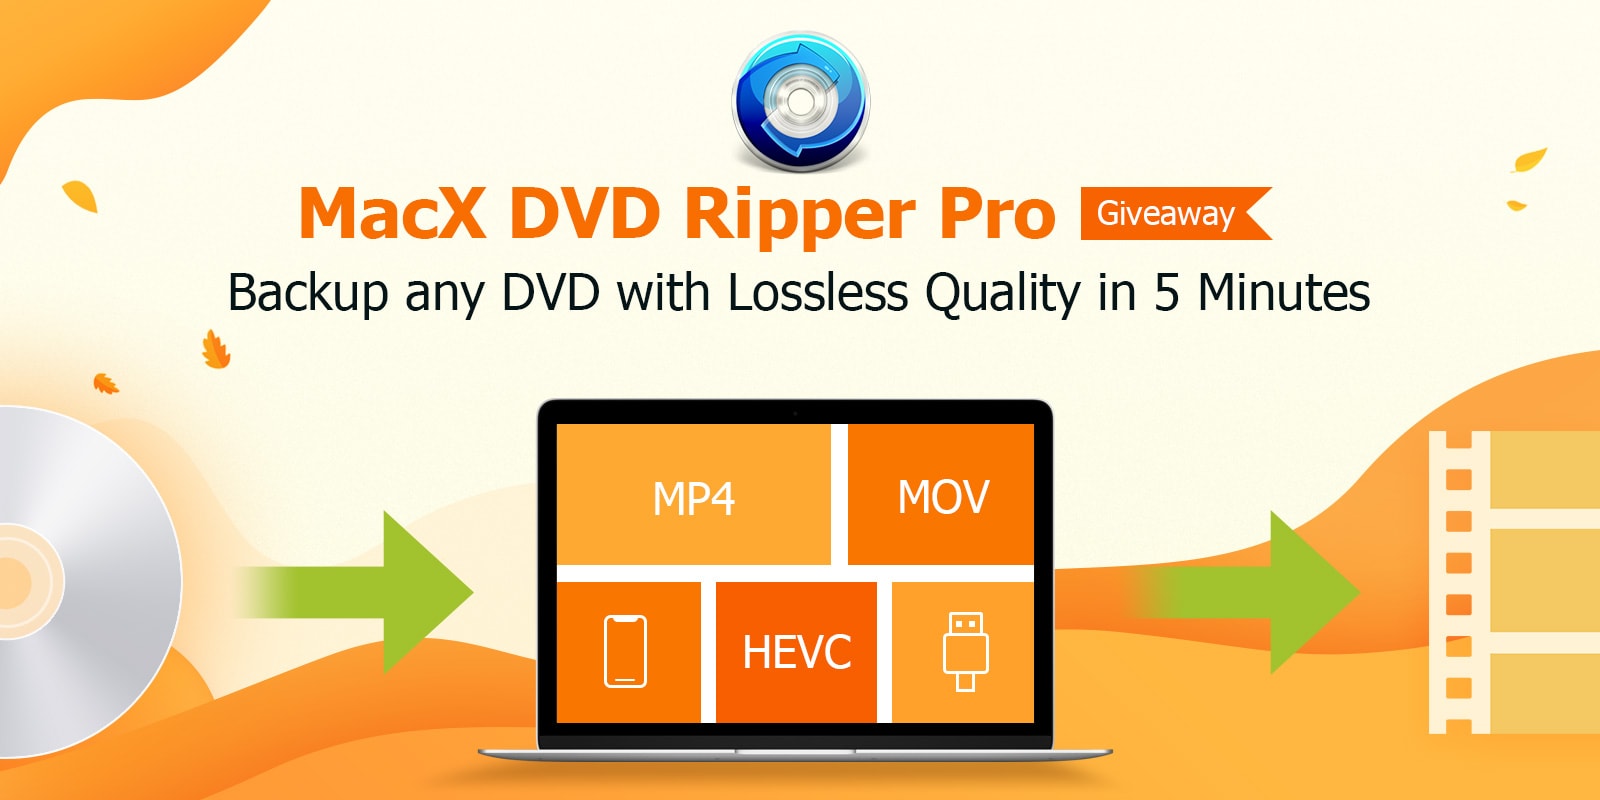 You have until December 10 to score a free copy of the powerhouse app, MacX DVD Ripper.